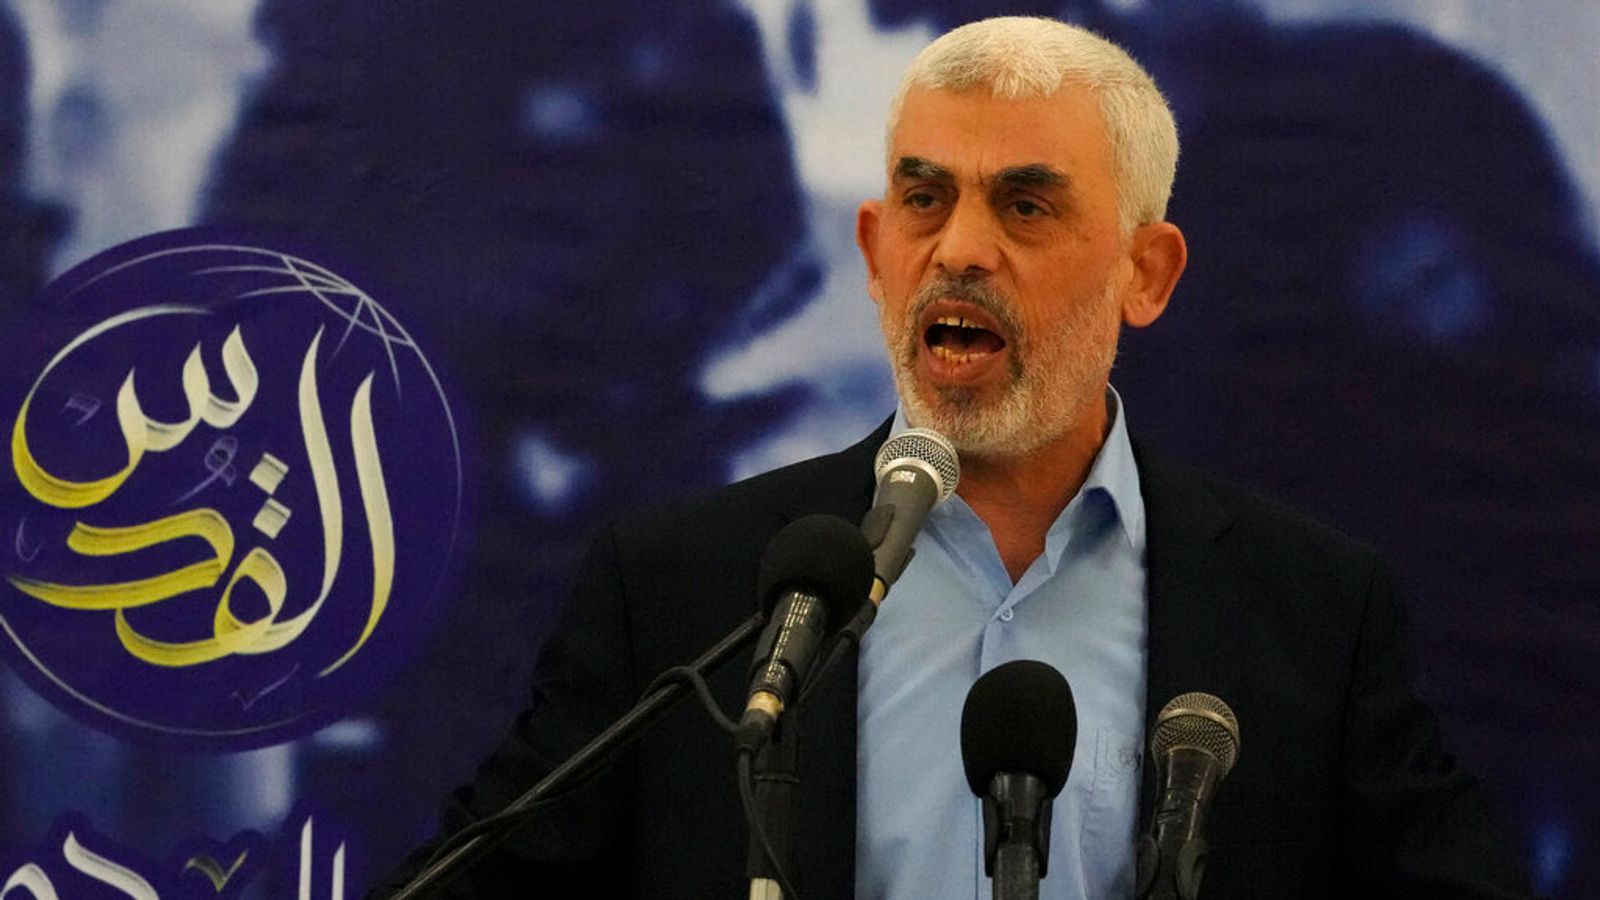 Who is Hamas leader Yahya Sinwar - the 'butcher of Khan Younis' Israel claims to have trapped in a bunker?